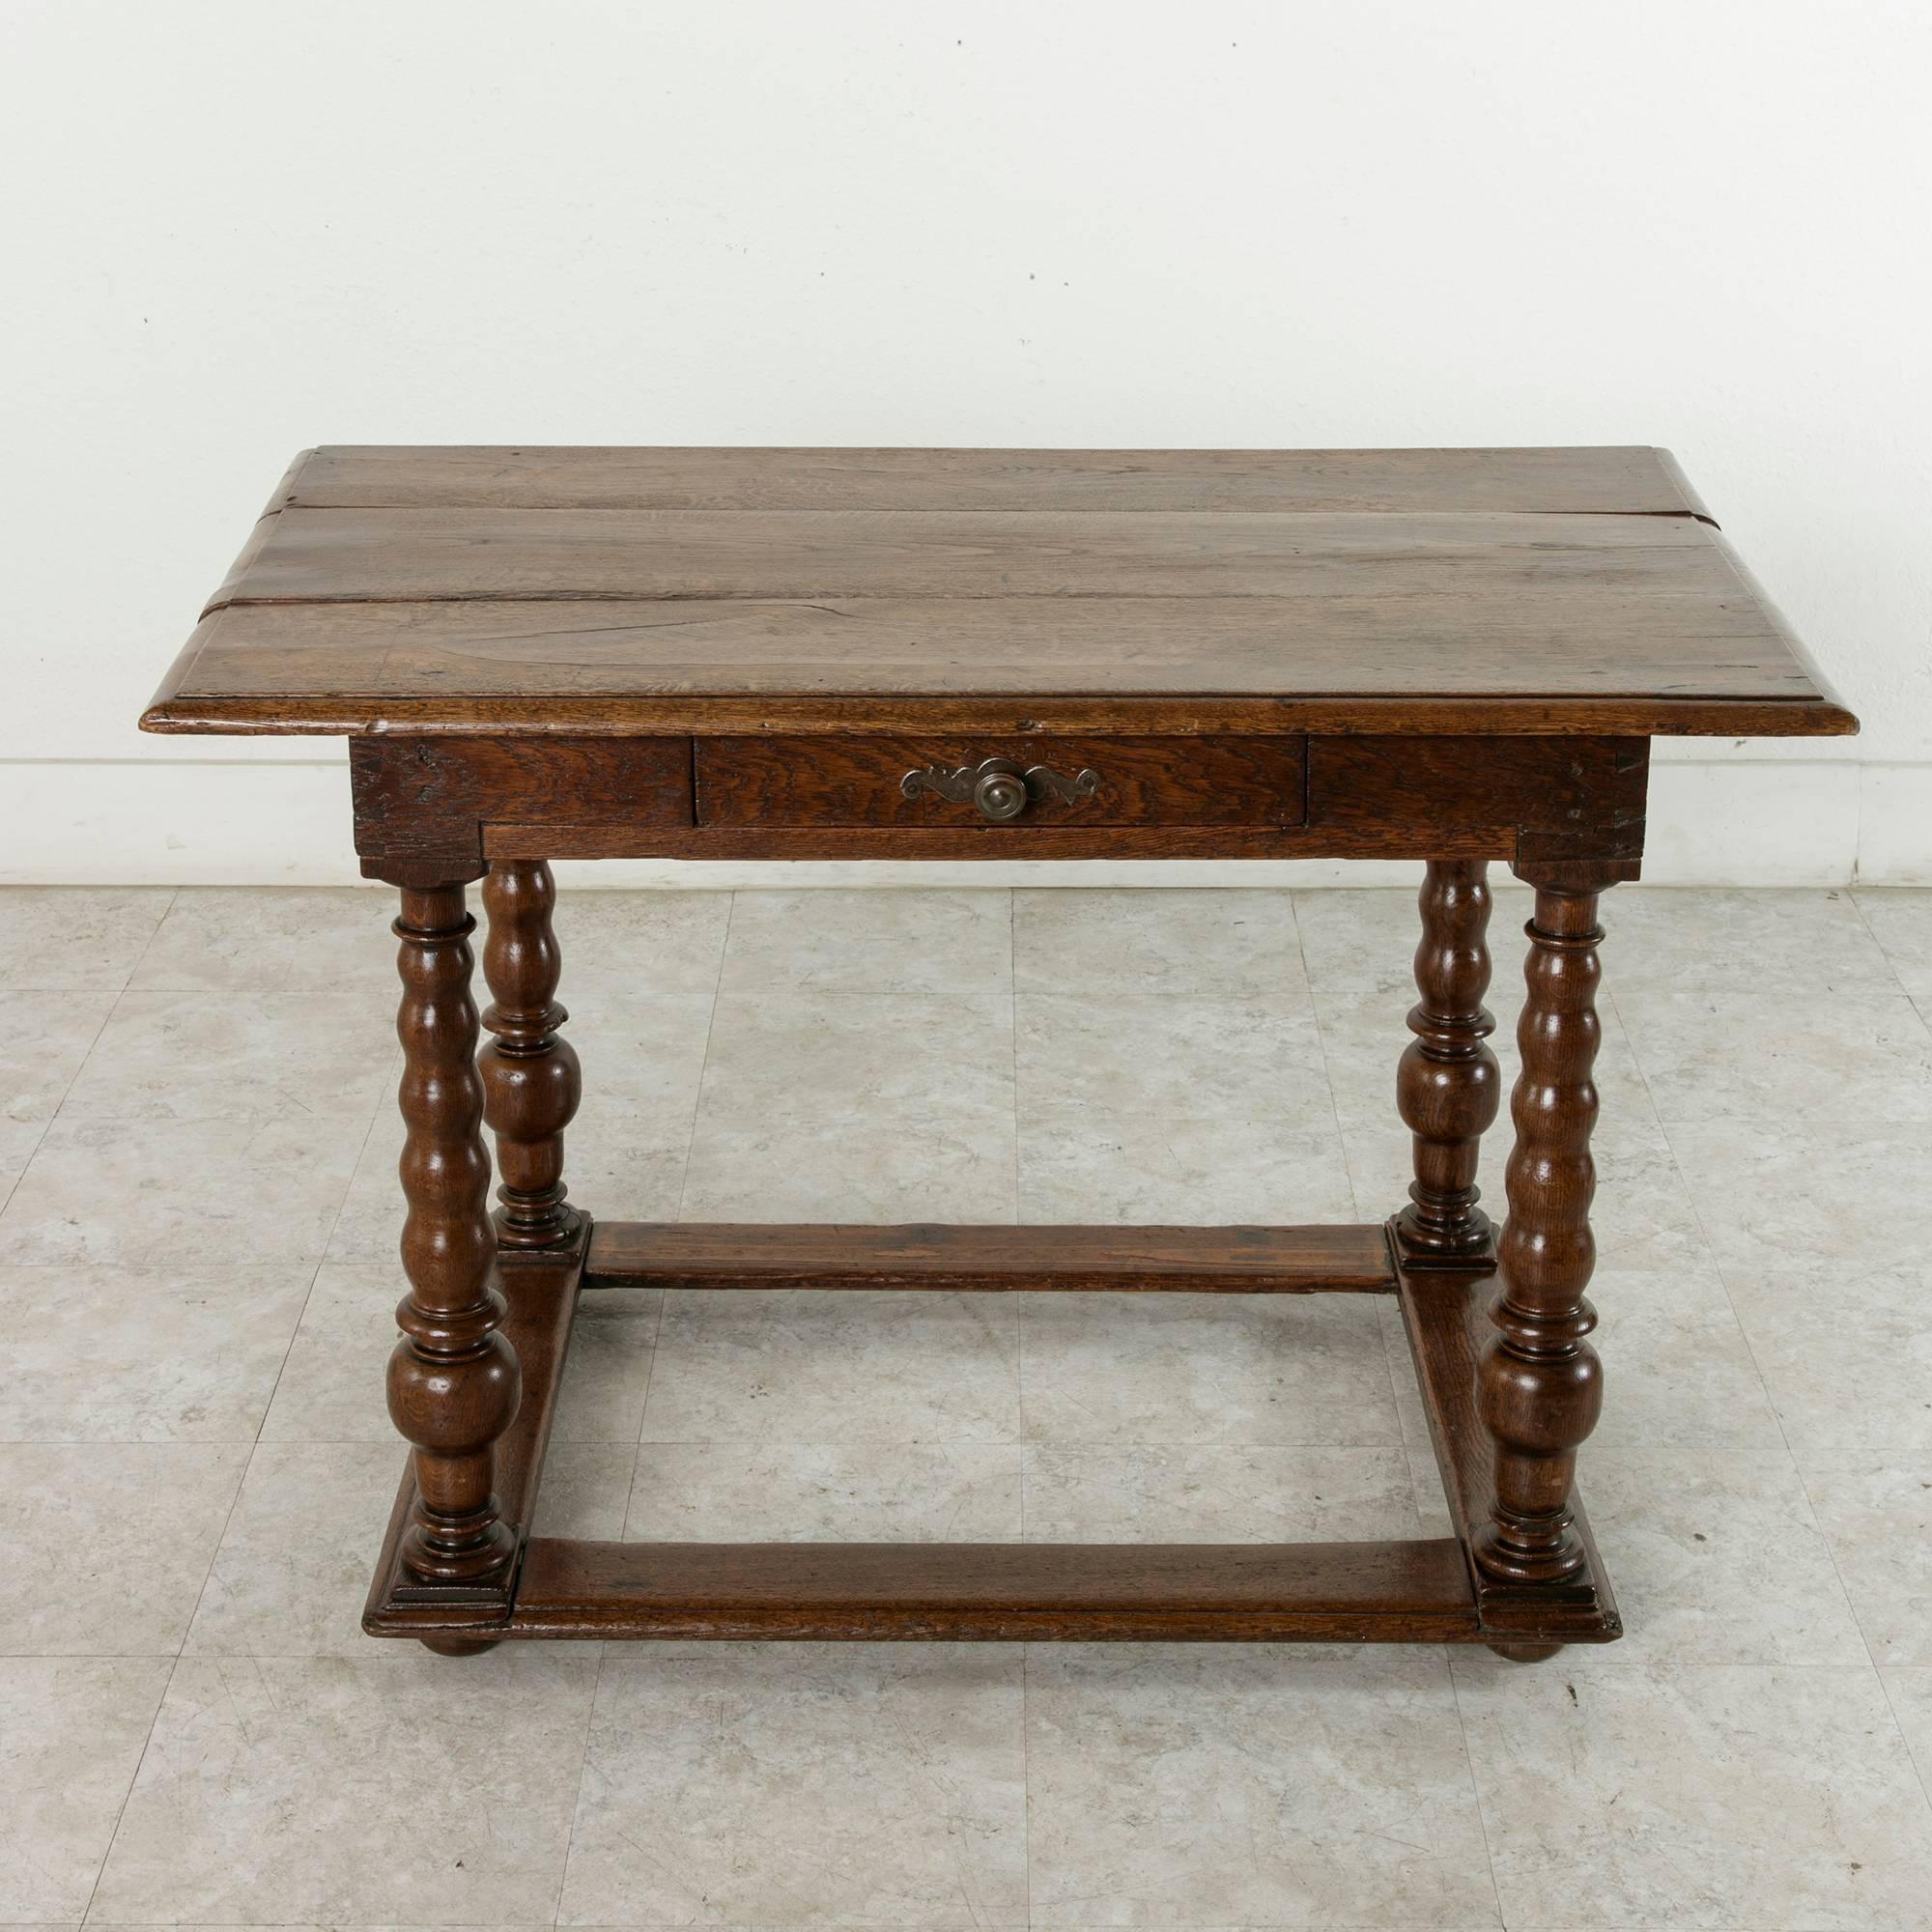 French 17th Century Louis XIII Period Oak Table with Spooled Legs and Single Drawer